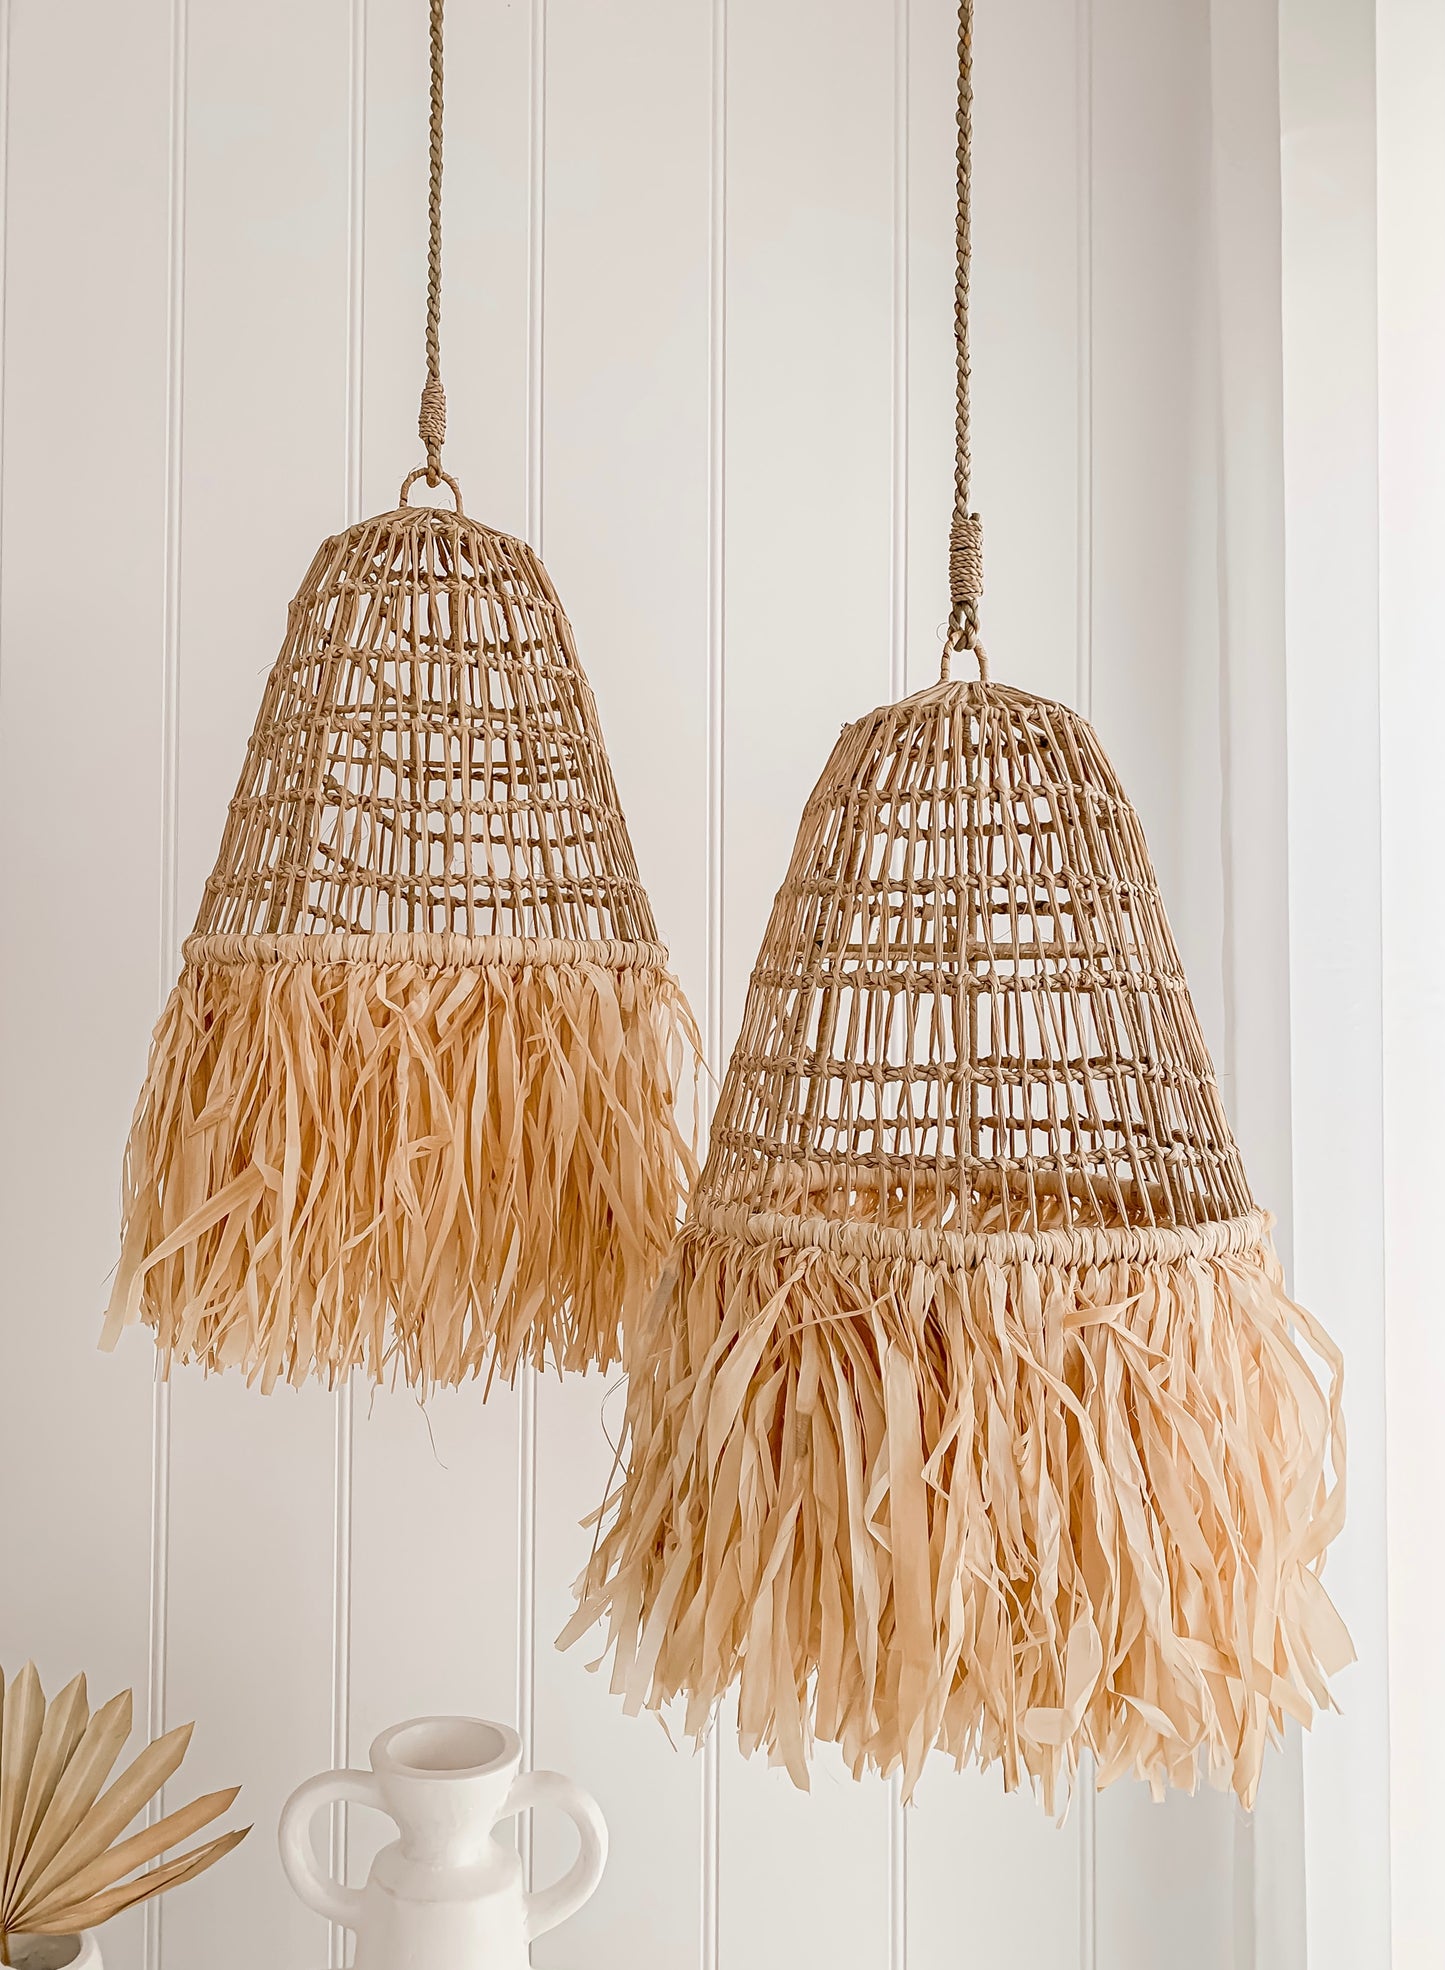 Two Ellie | Seagrass Pendant hanging lamps with fringes in a modern design by Barre Living.